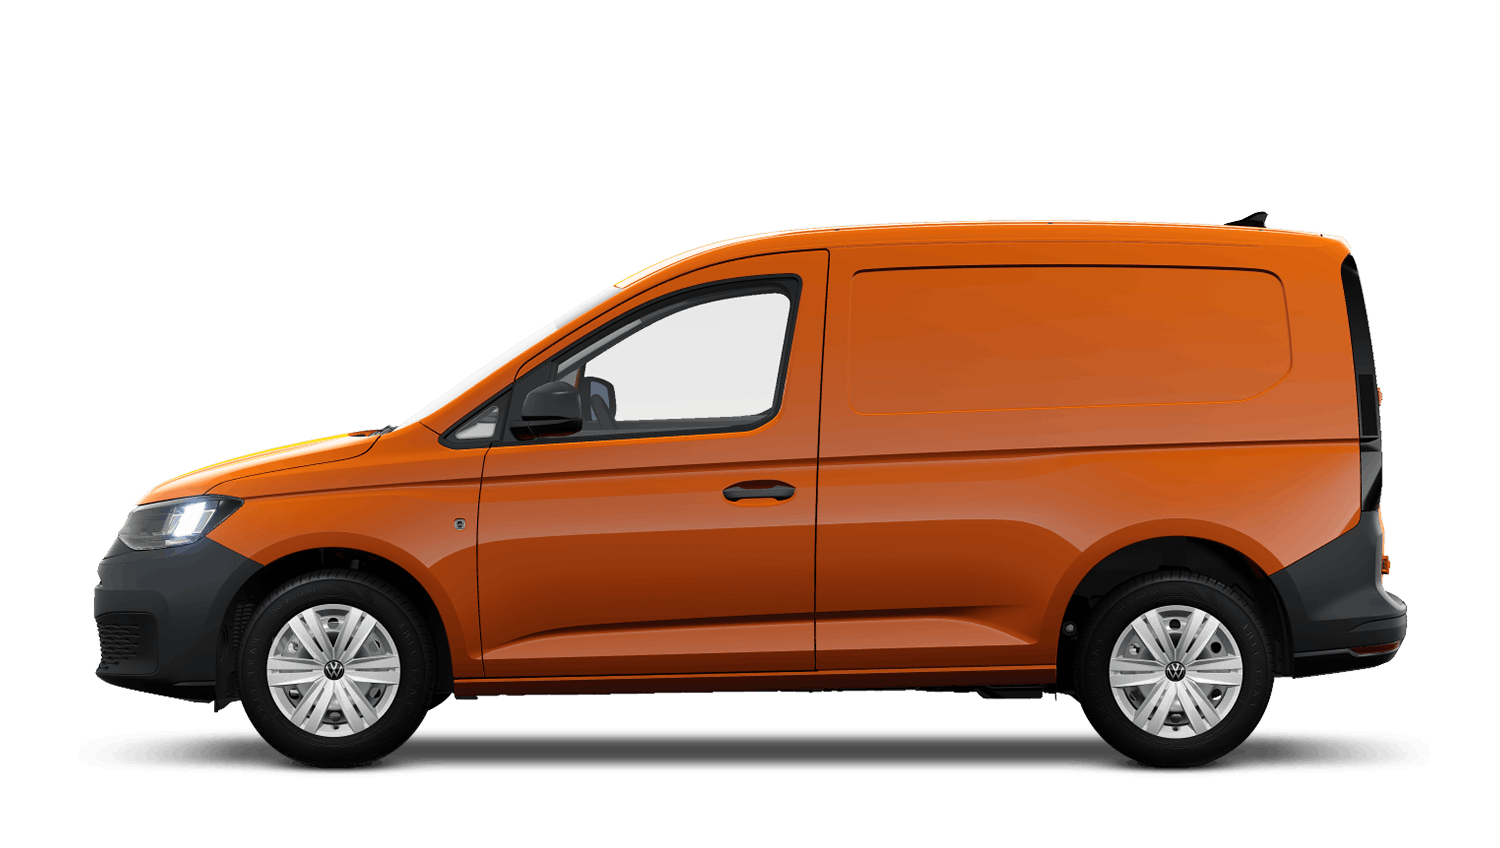 Caddy Cargo Contract Hire Offer